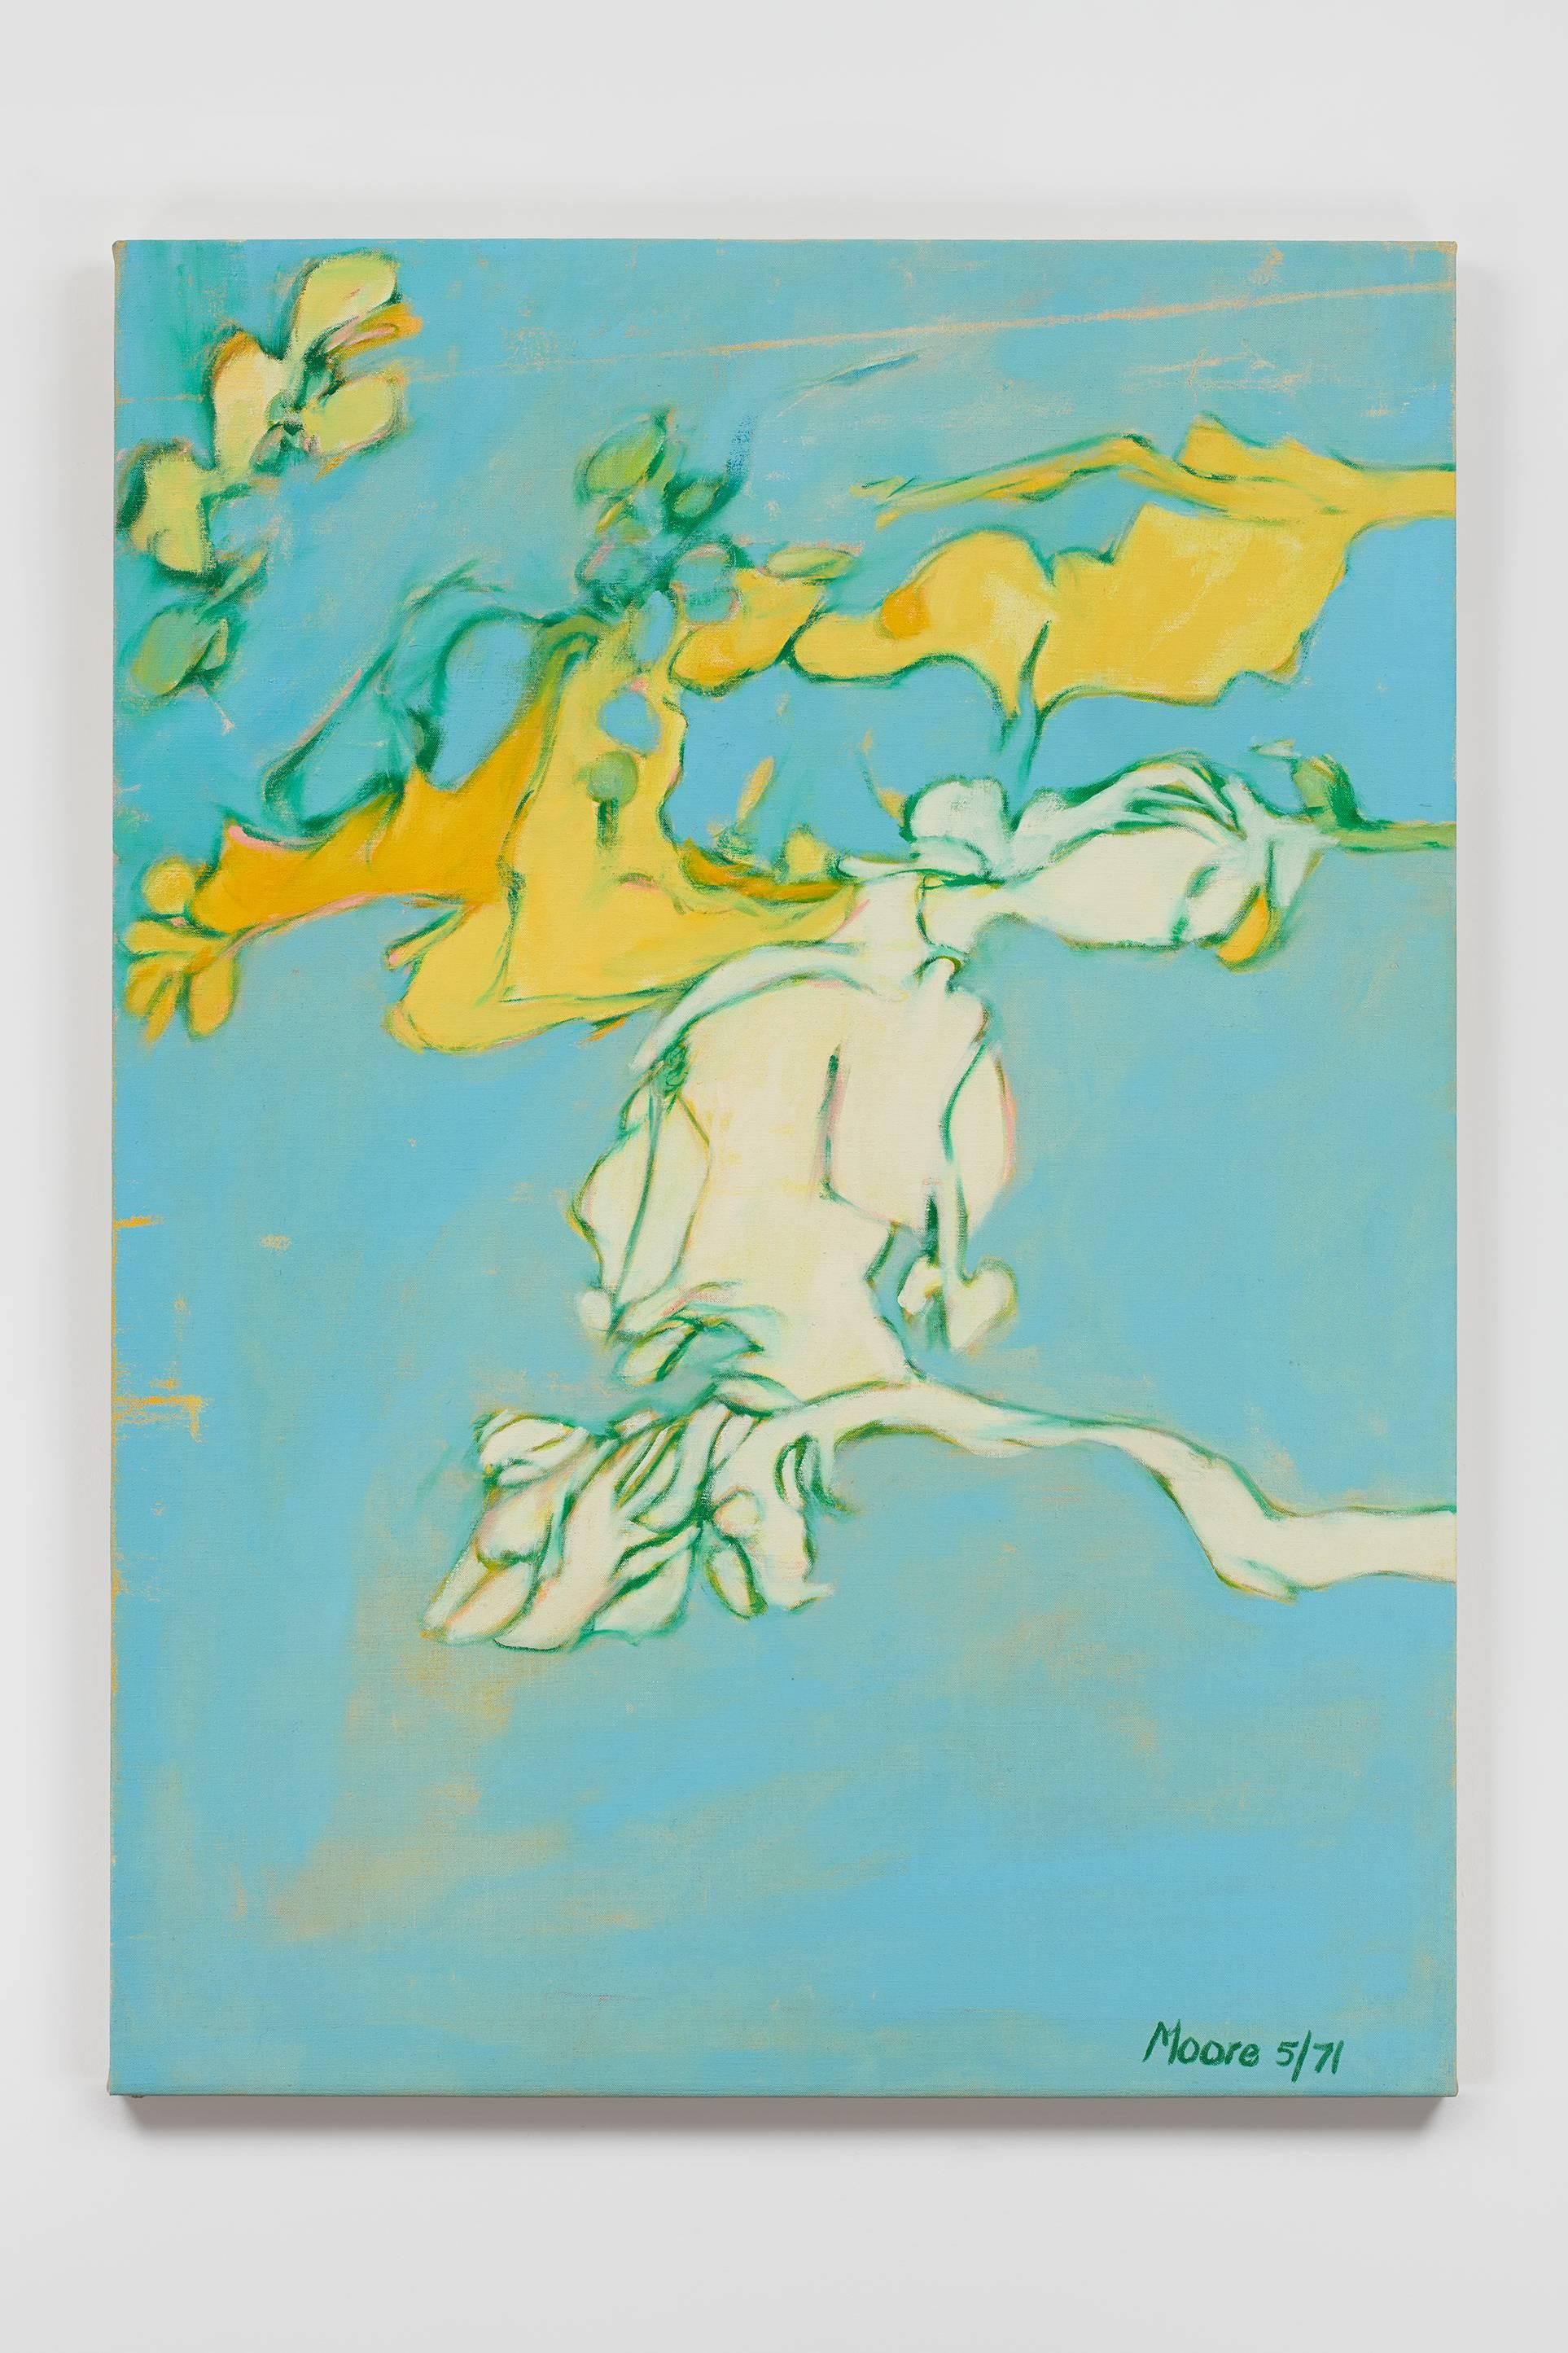 James Moore Abstract Painting - Untitled I (Medium 2), abstract acrylic on canvas, blue and yellow forms